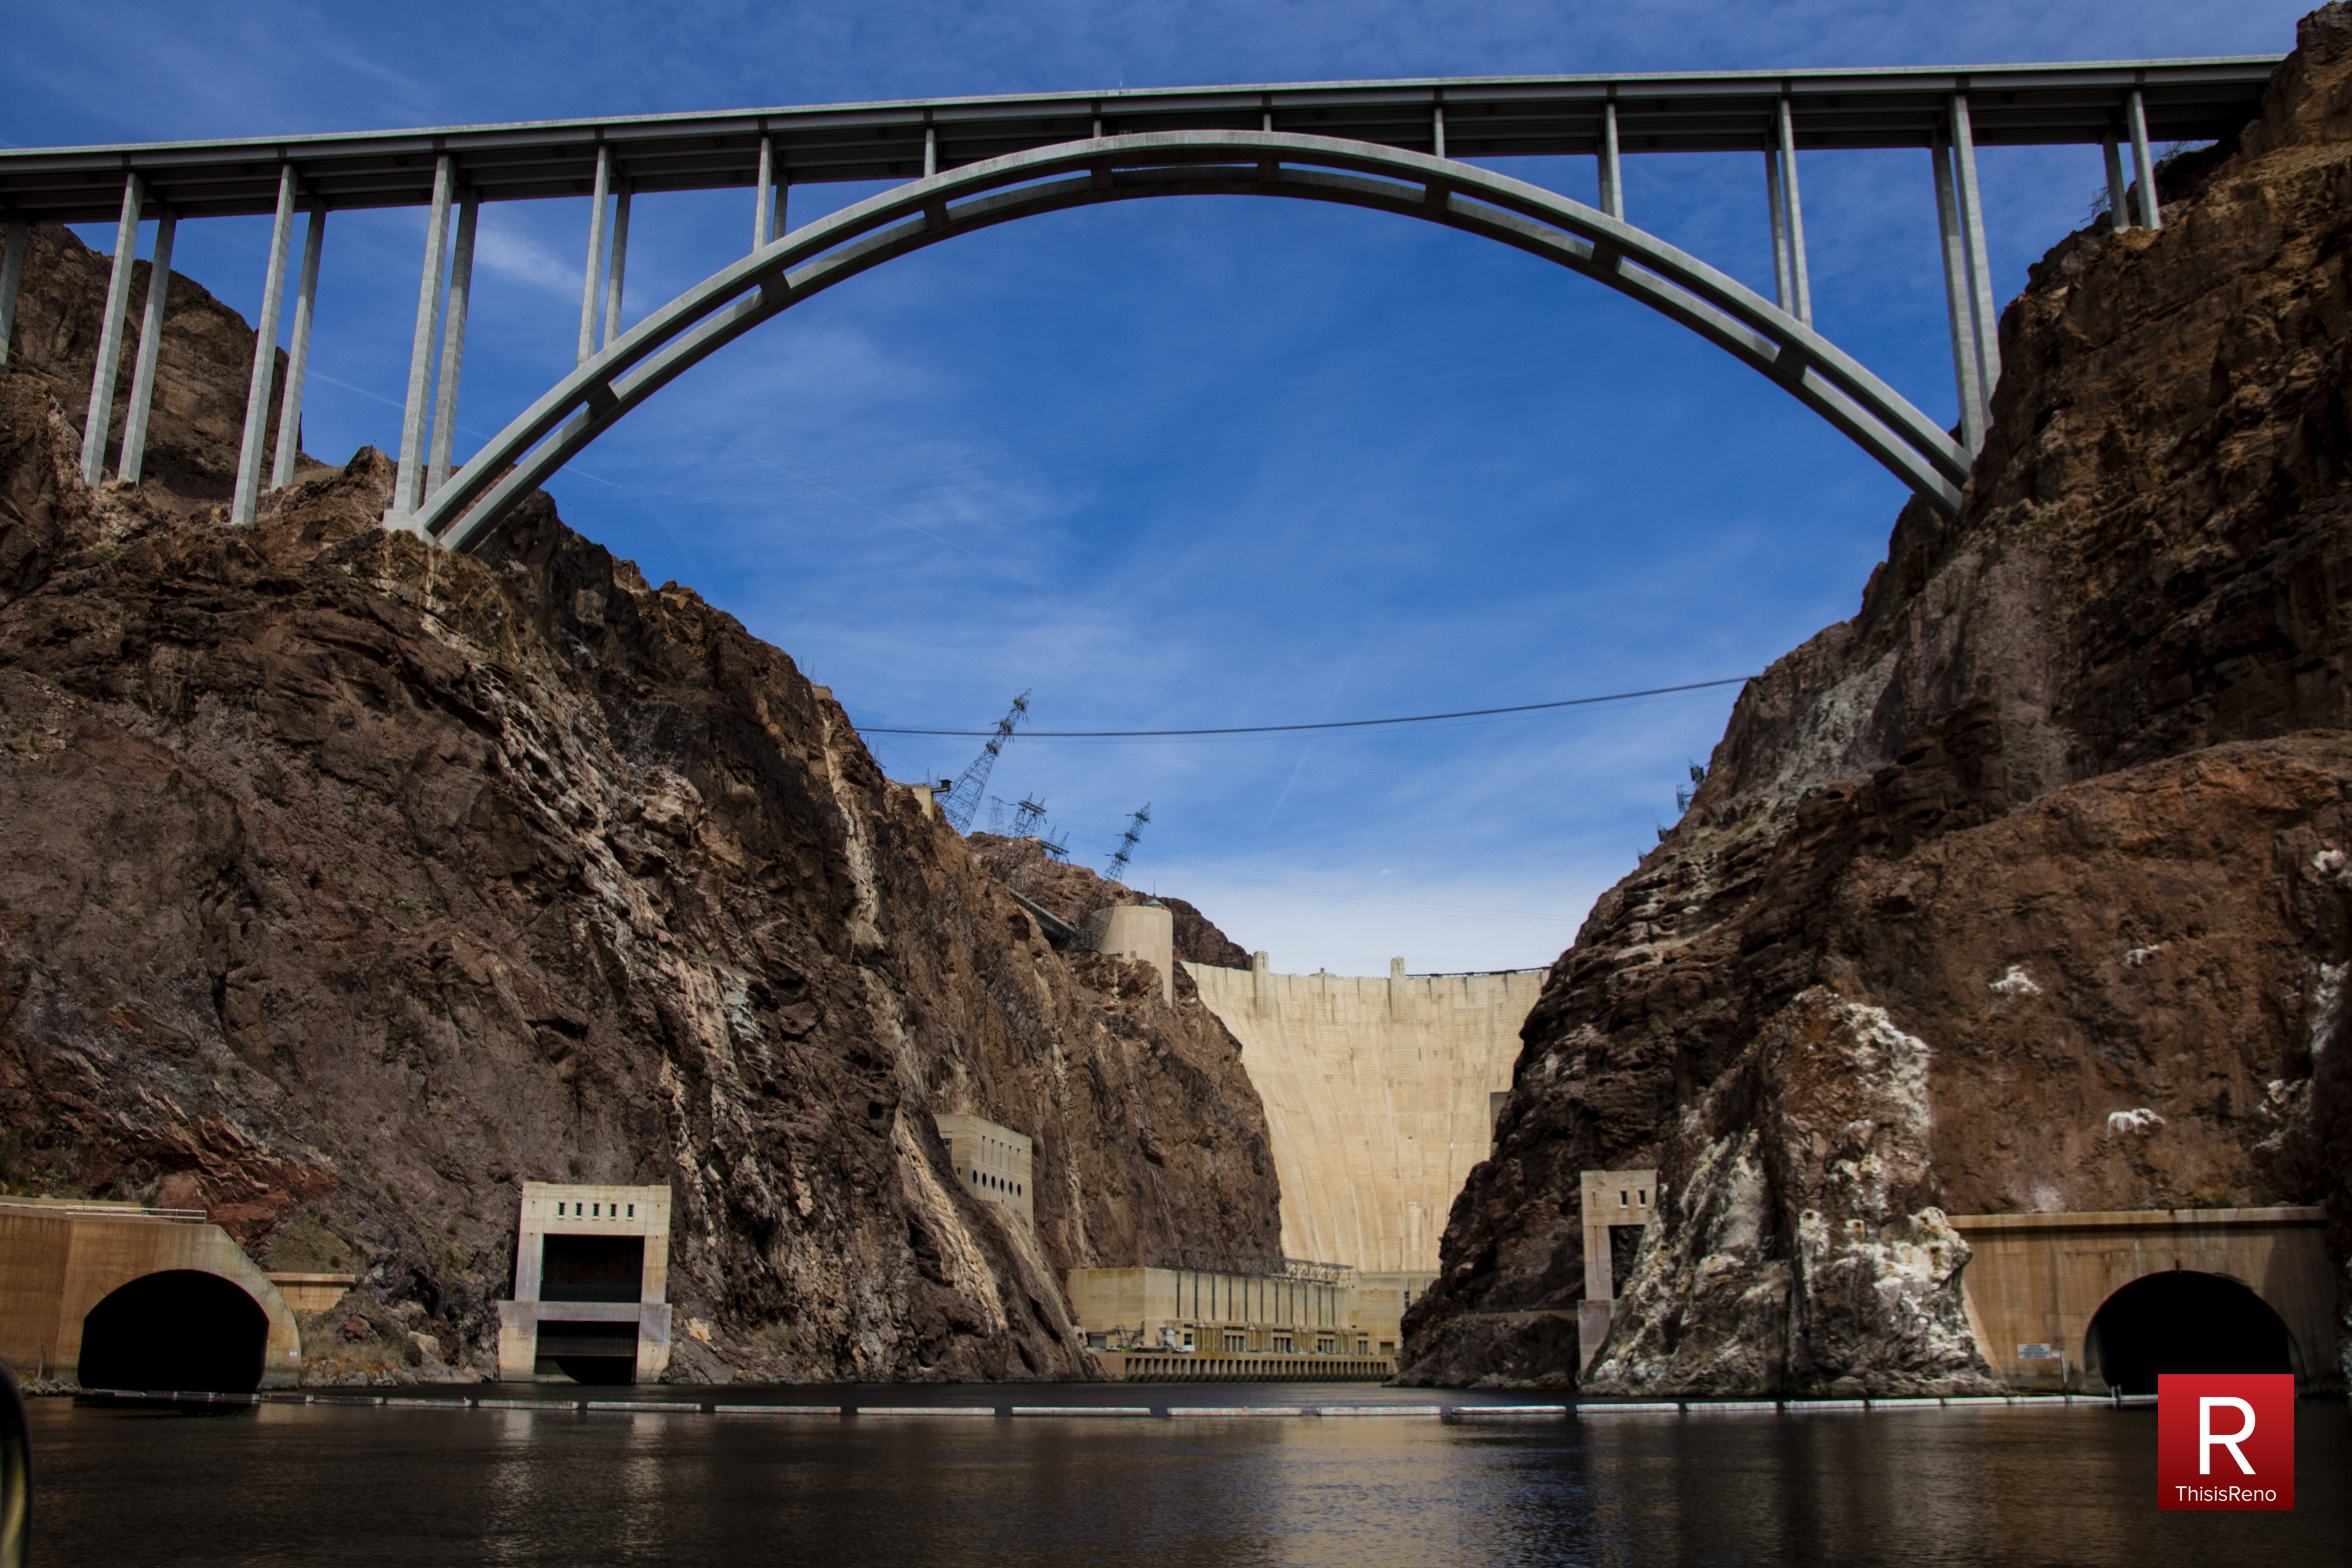 PHOTOS: Hoover Dam May Be Best Seen From Below